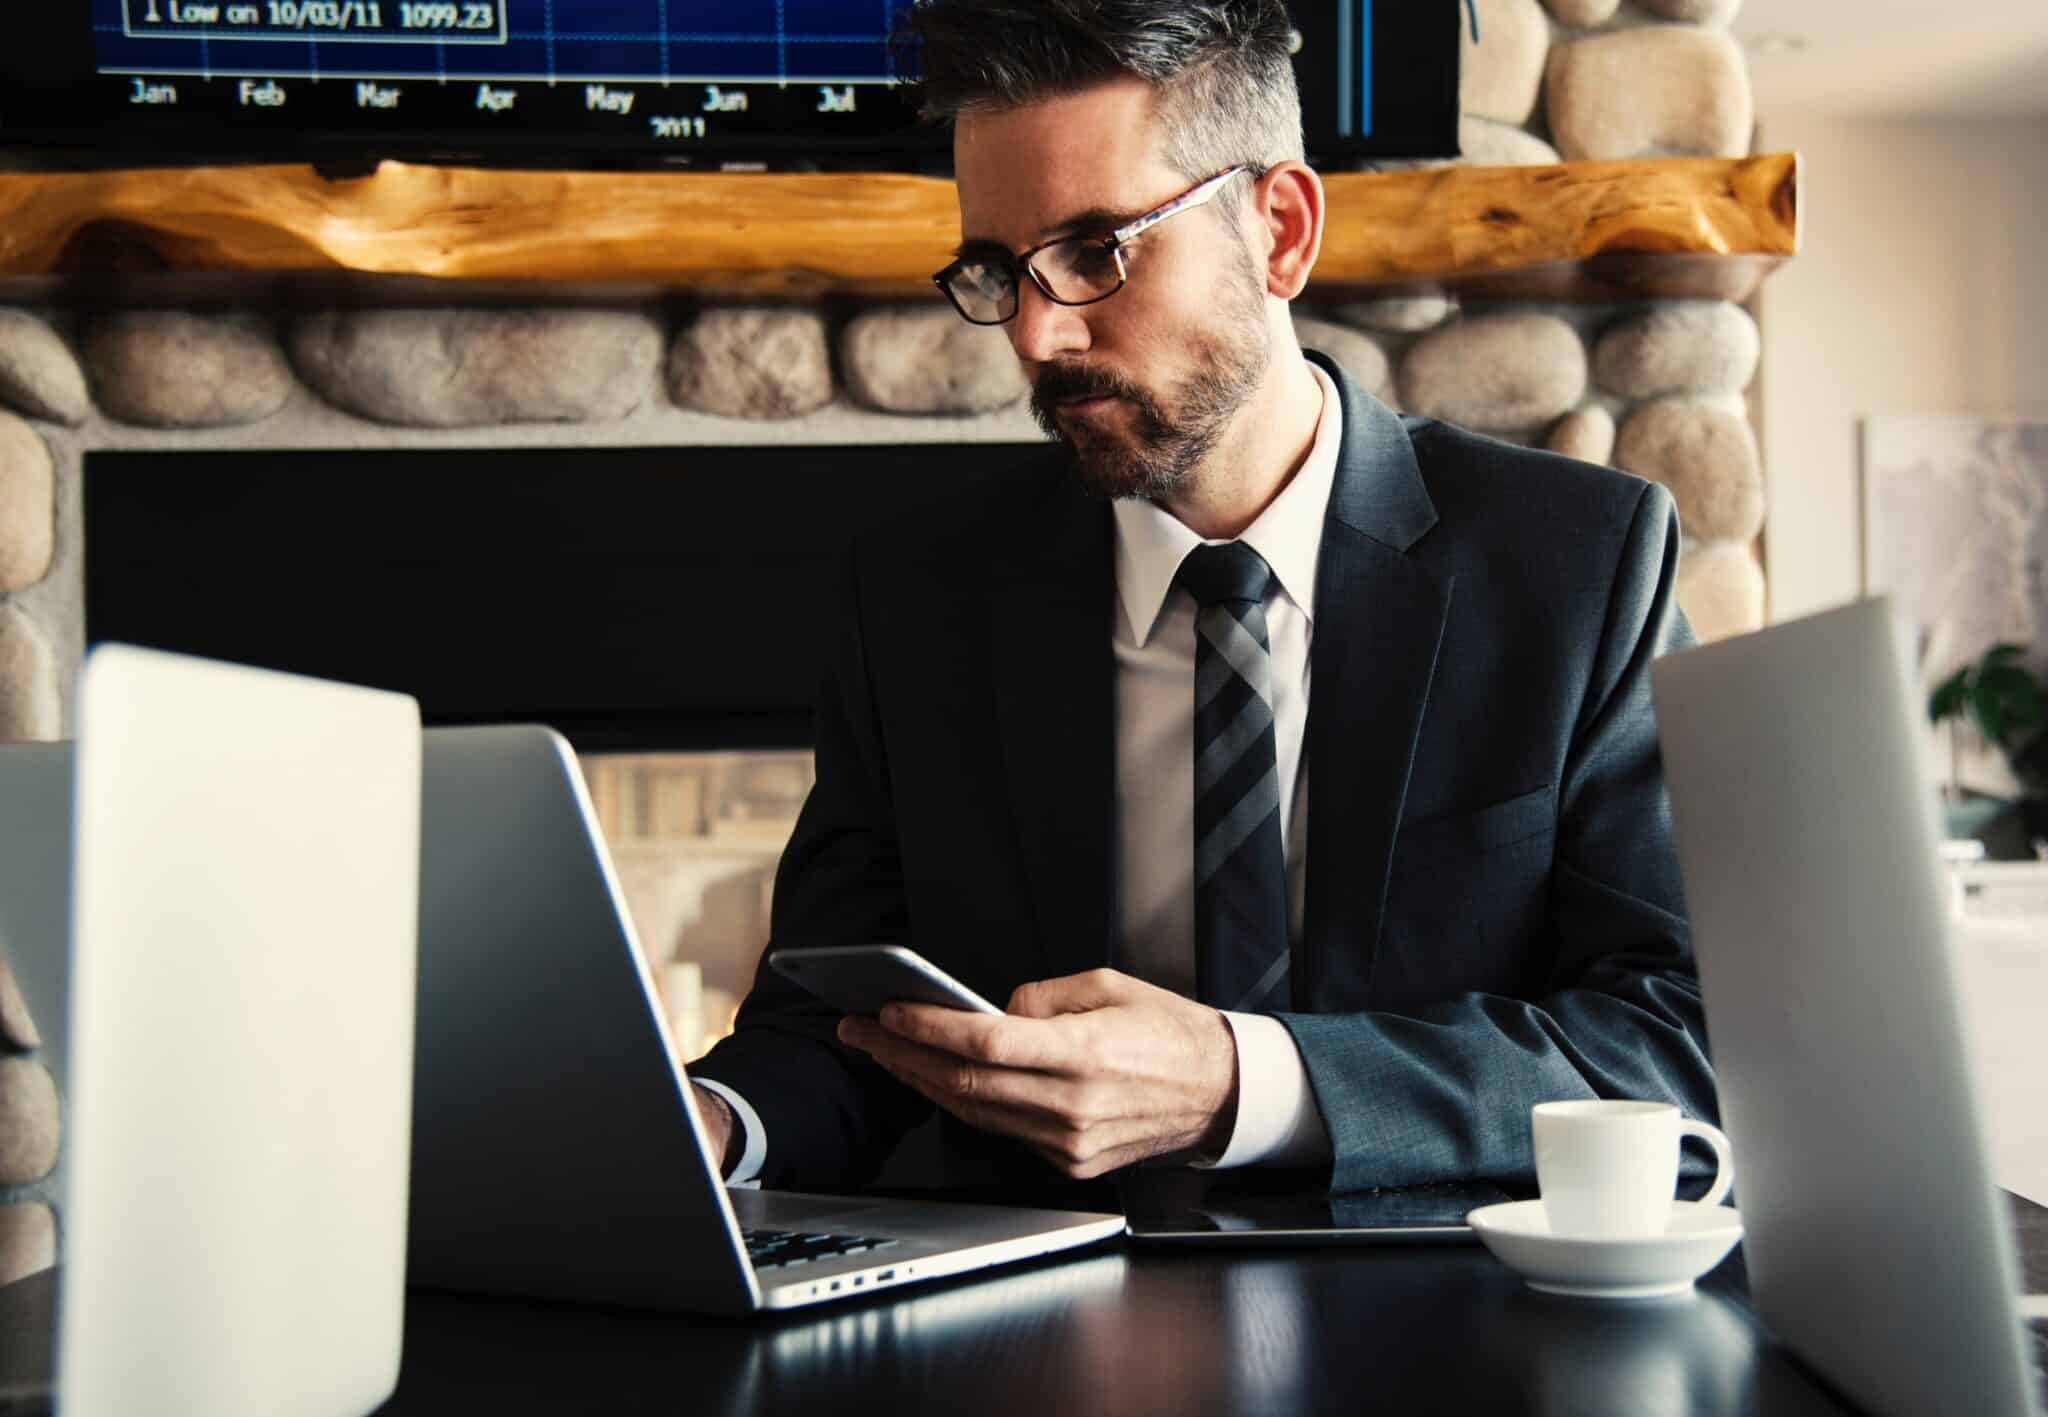 Man in a business suit drinking coffee and working on a laptop computer